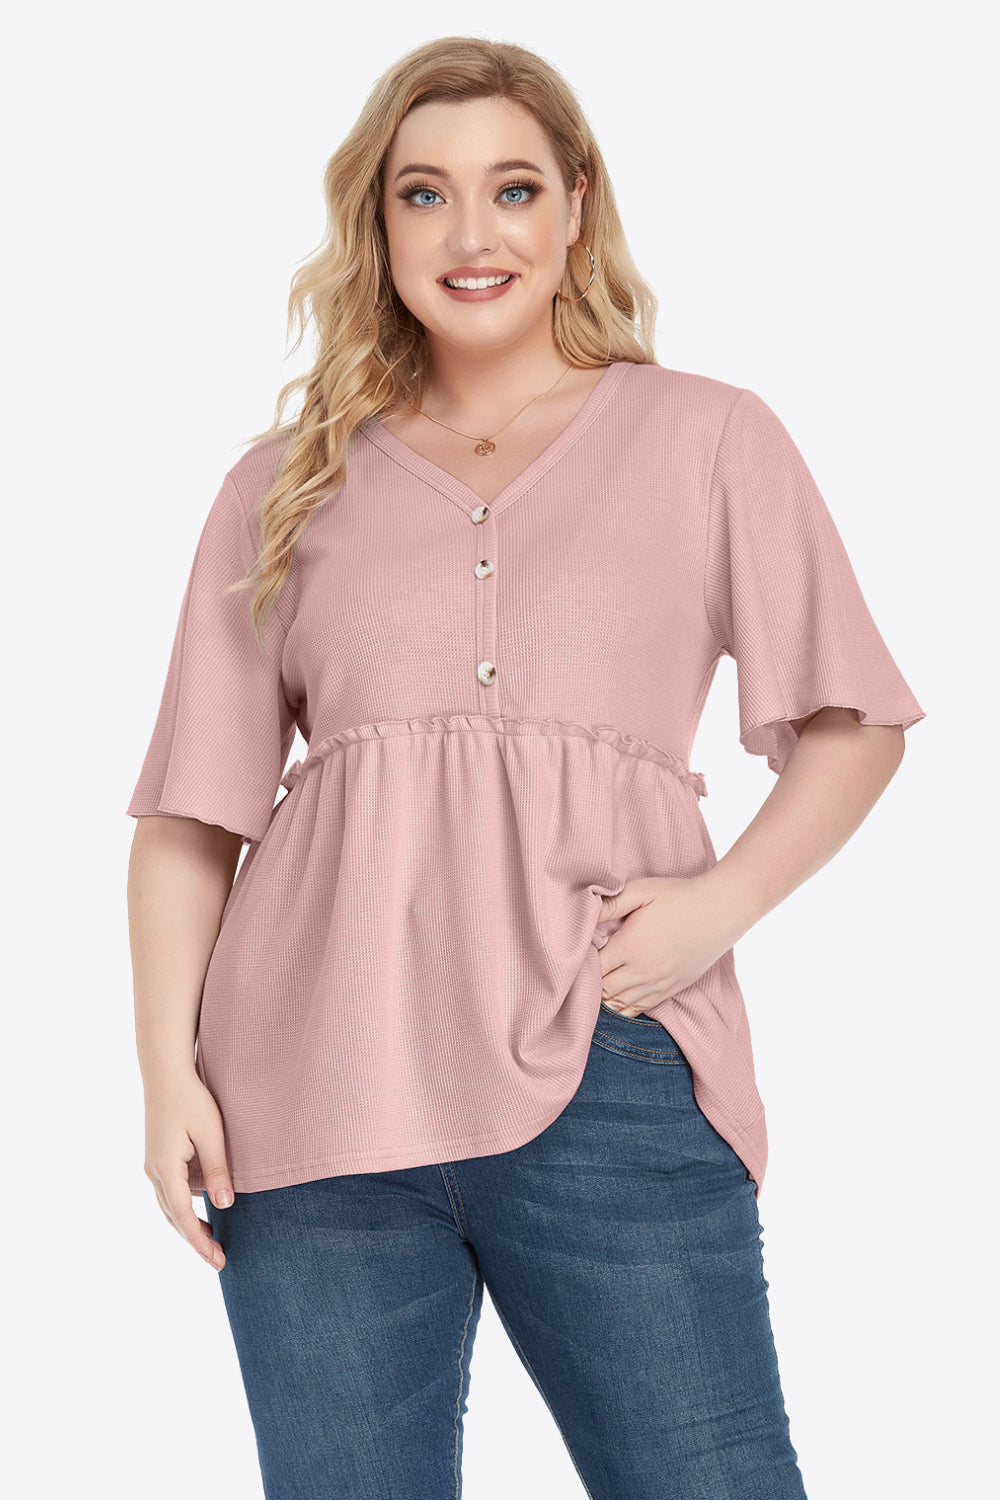 Light Gray Plus Size Buttoned V-Neck Frill Trim Babydoll Blouse Tops